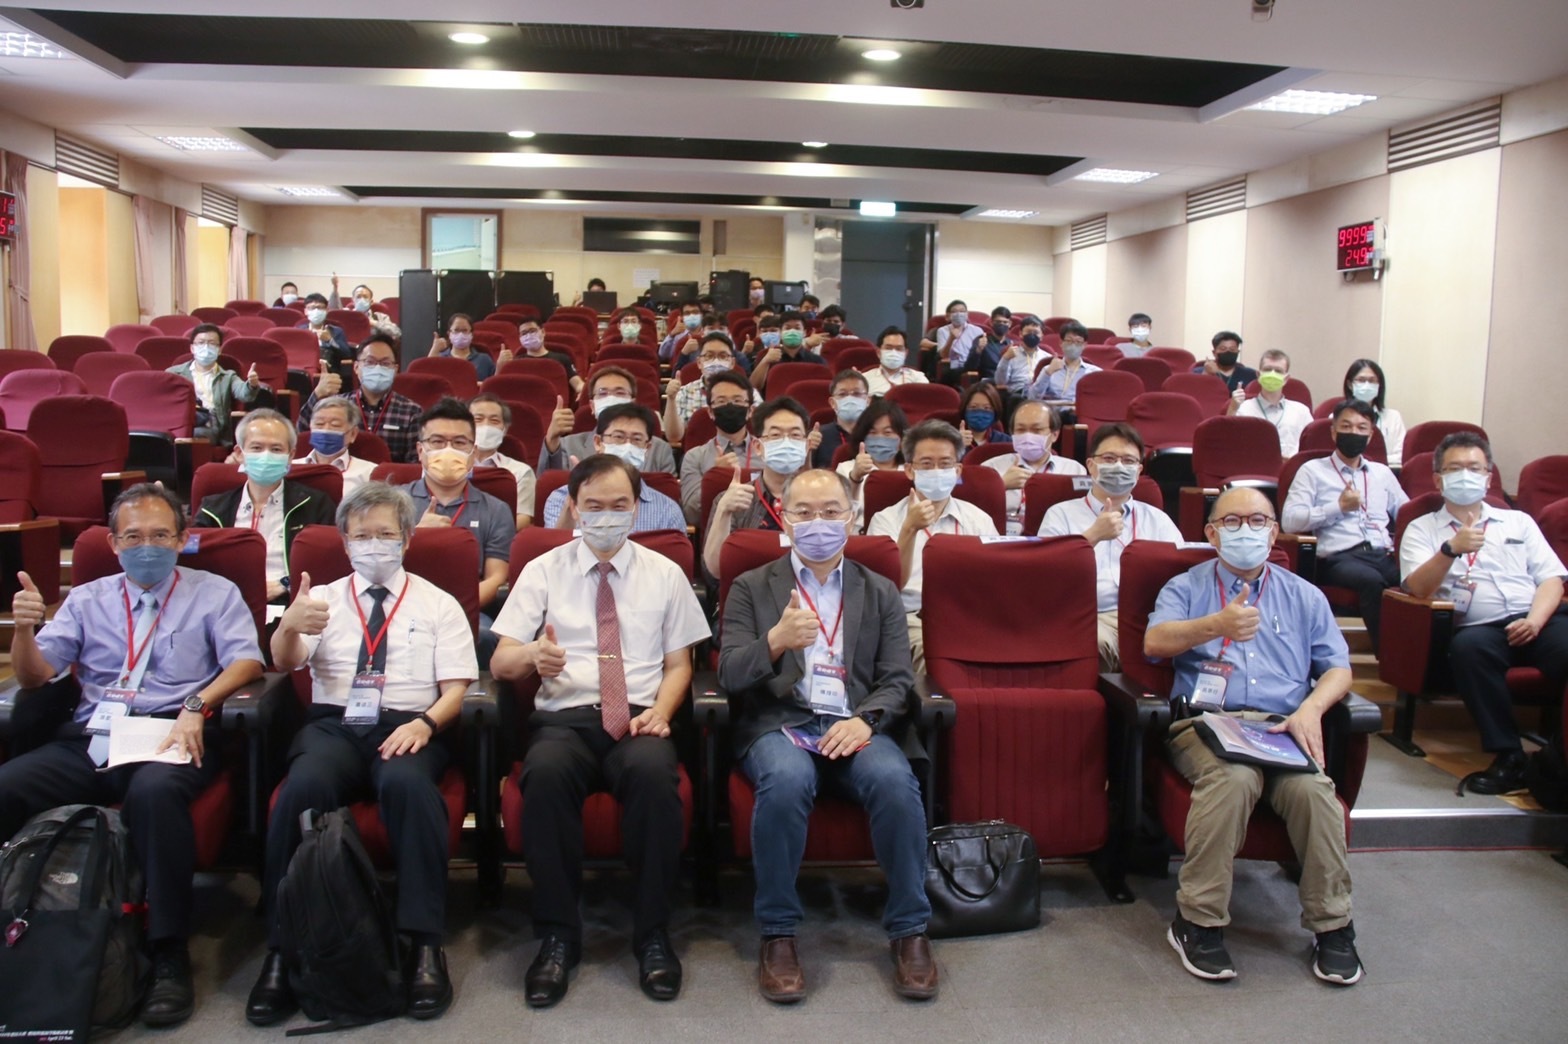 32nd National Conference on Combustion and Energy on Apr. 24 at NCKU.